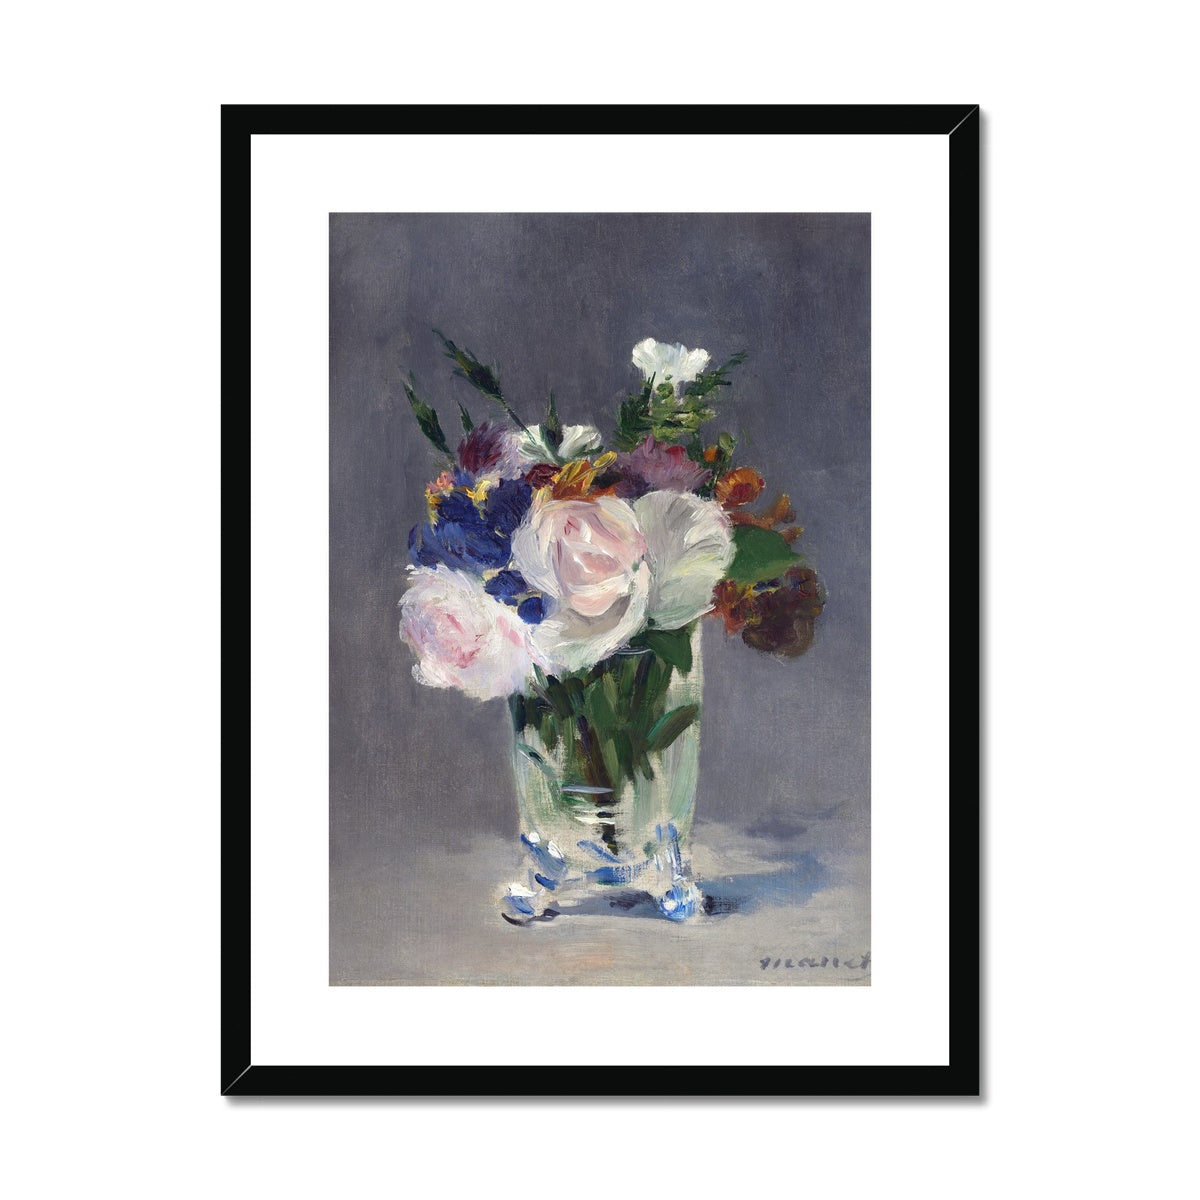 'Flowers in a Crystal Vase' Still Life by Edouard Manet. Framed Open Edition Fine Art Print. Historic Art